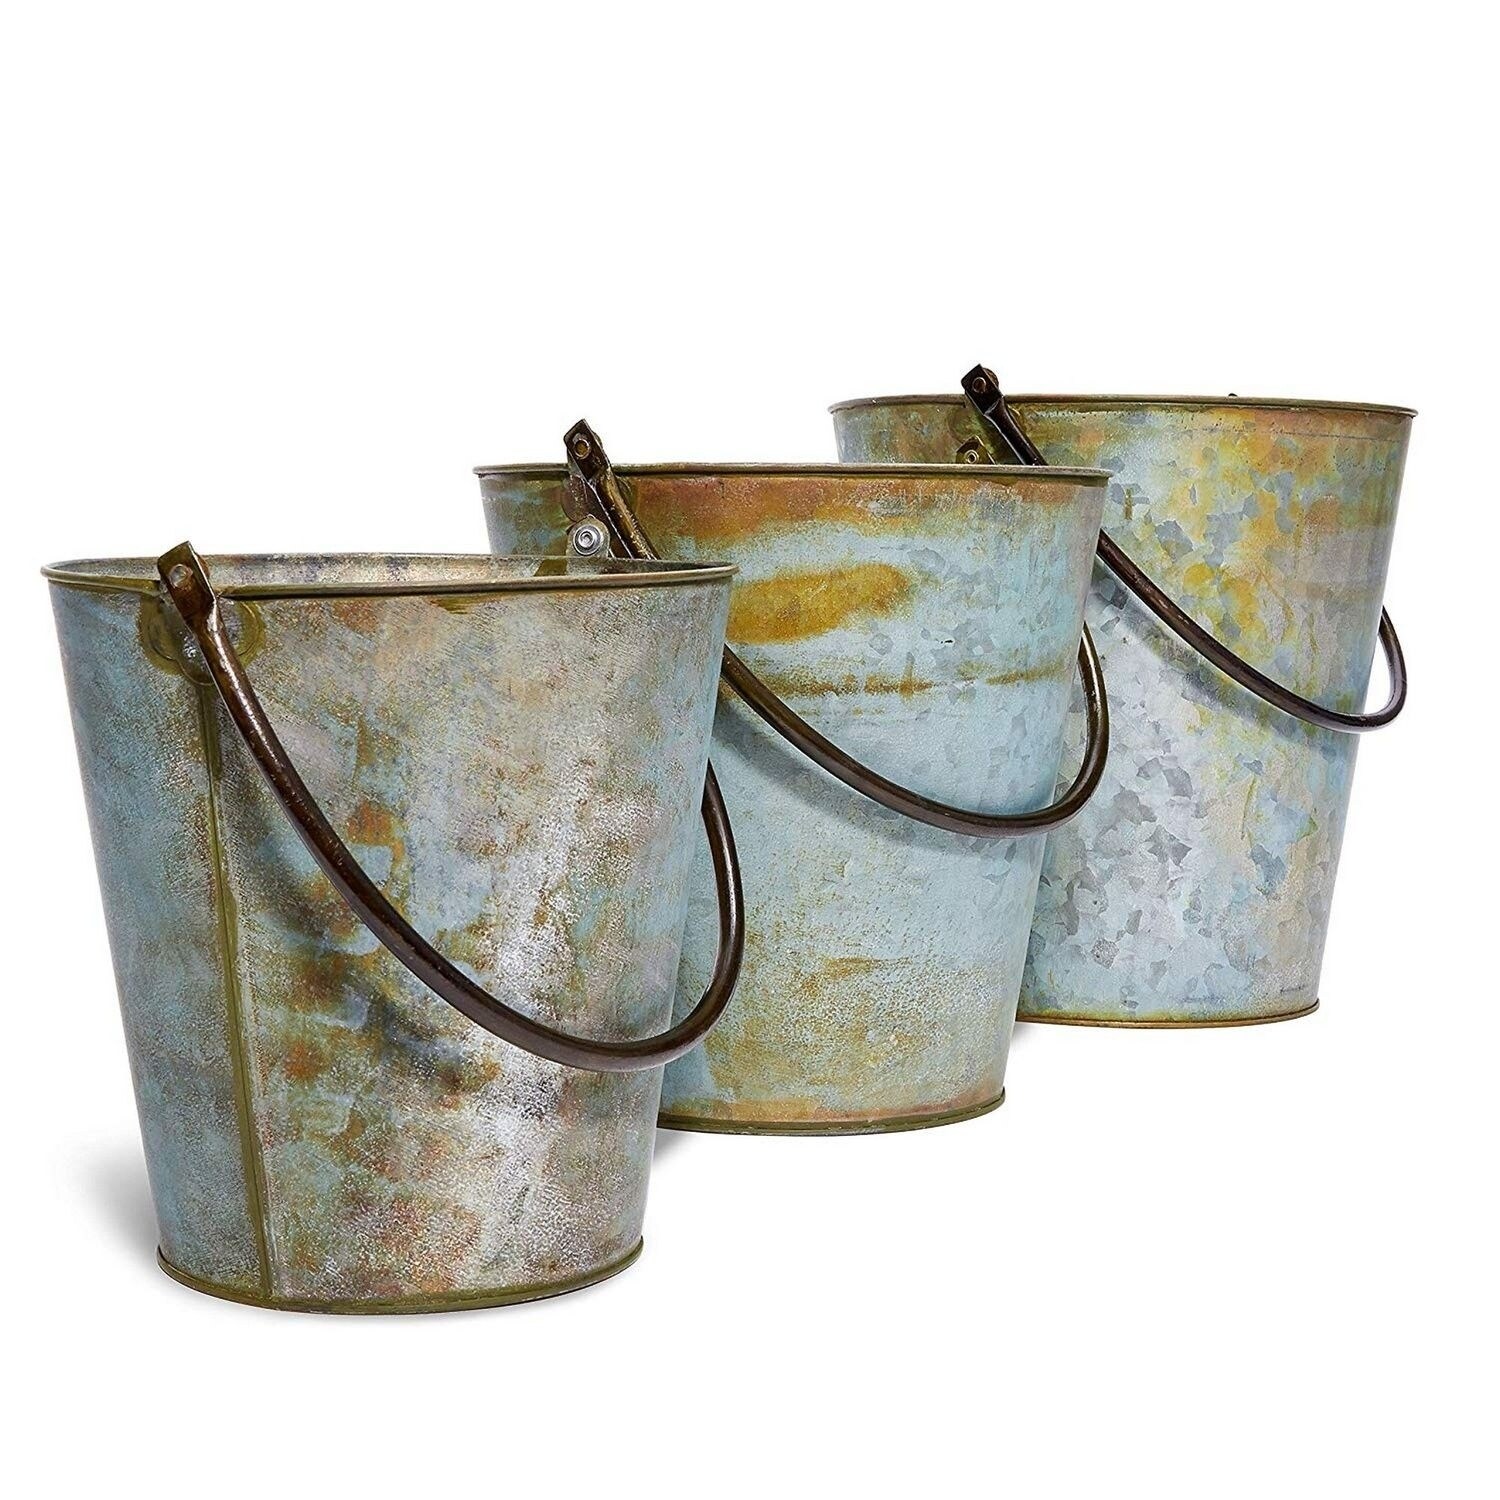 Metal Bucket with Handle – Rustics for Less